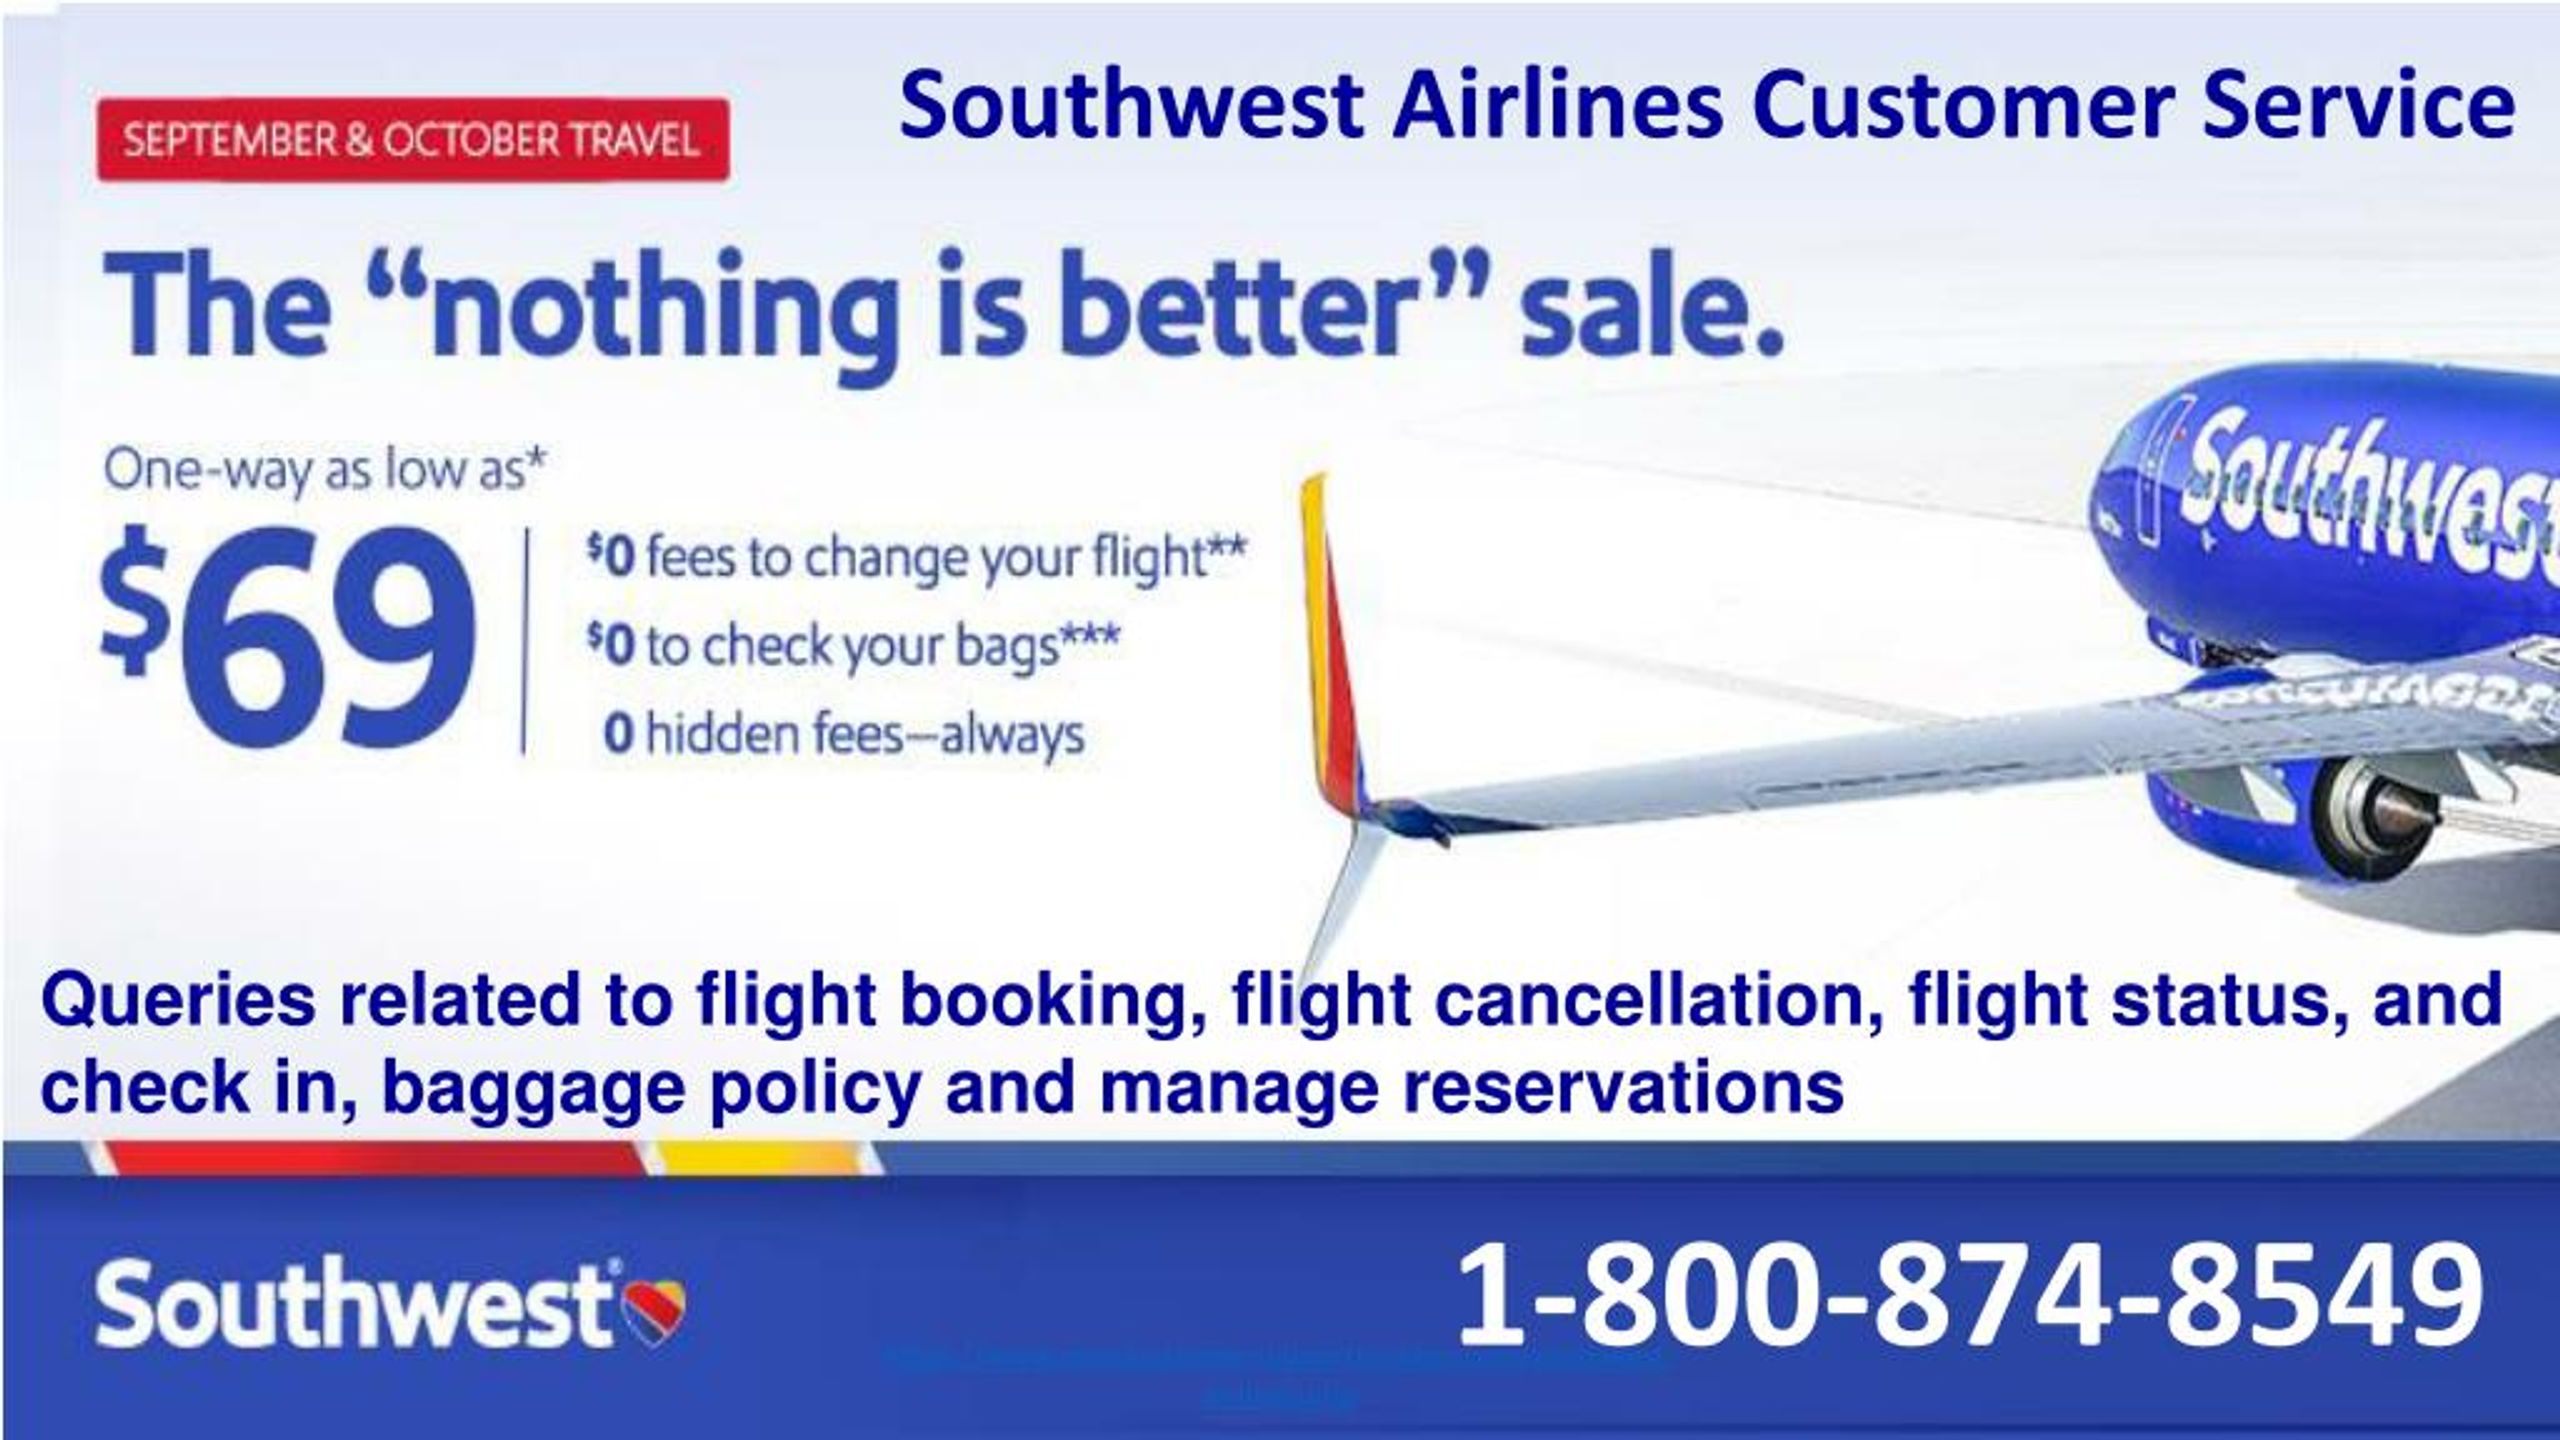 southwest airlines baggage fees military